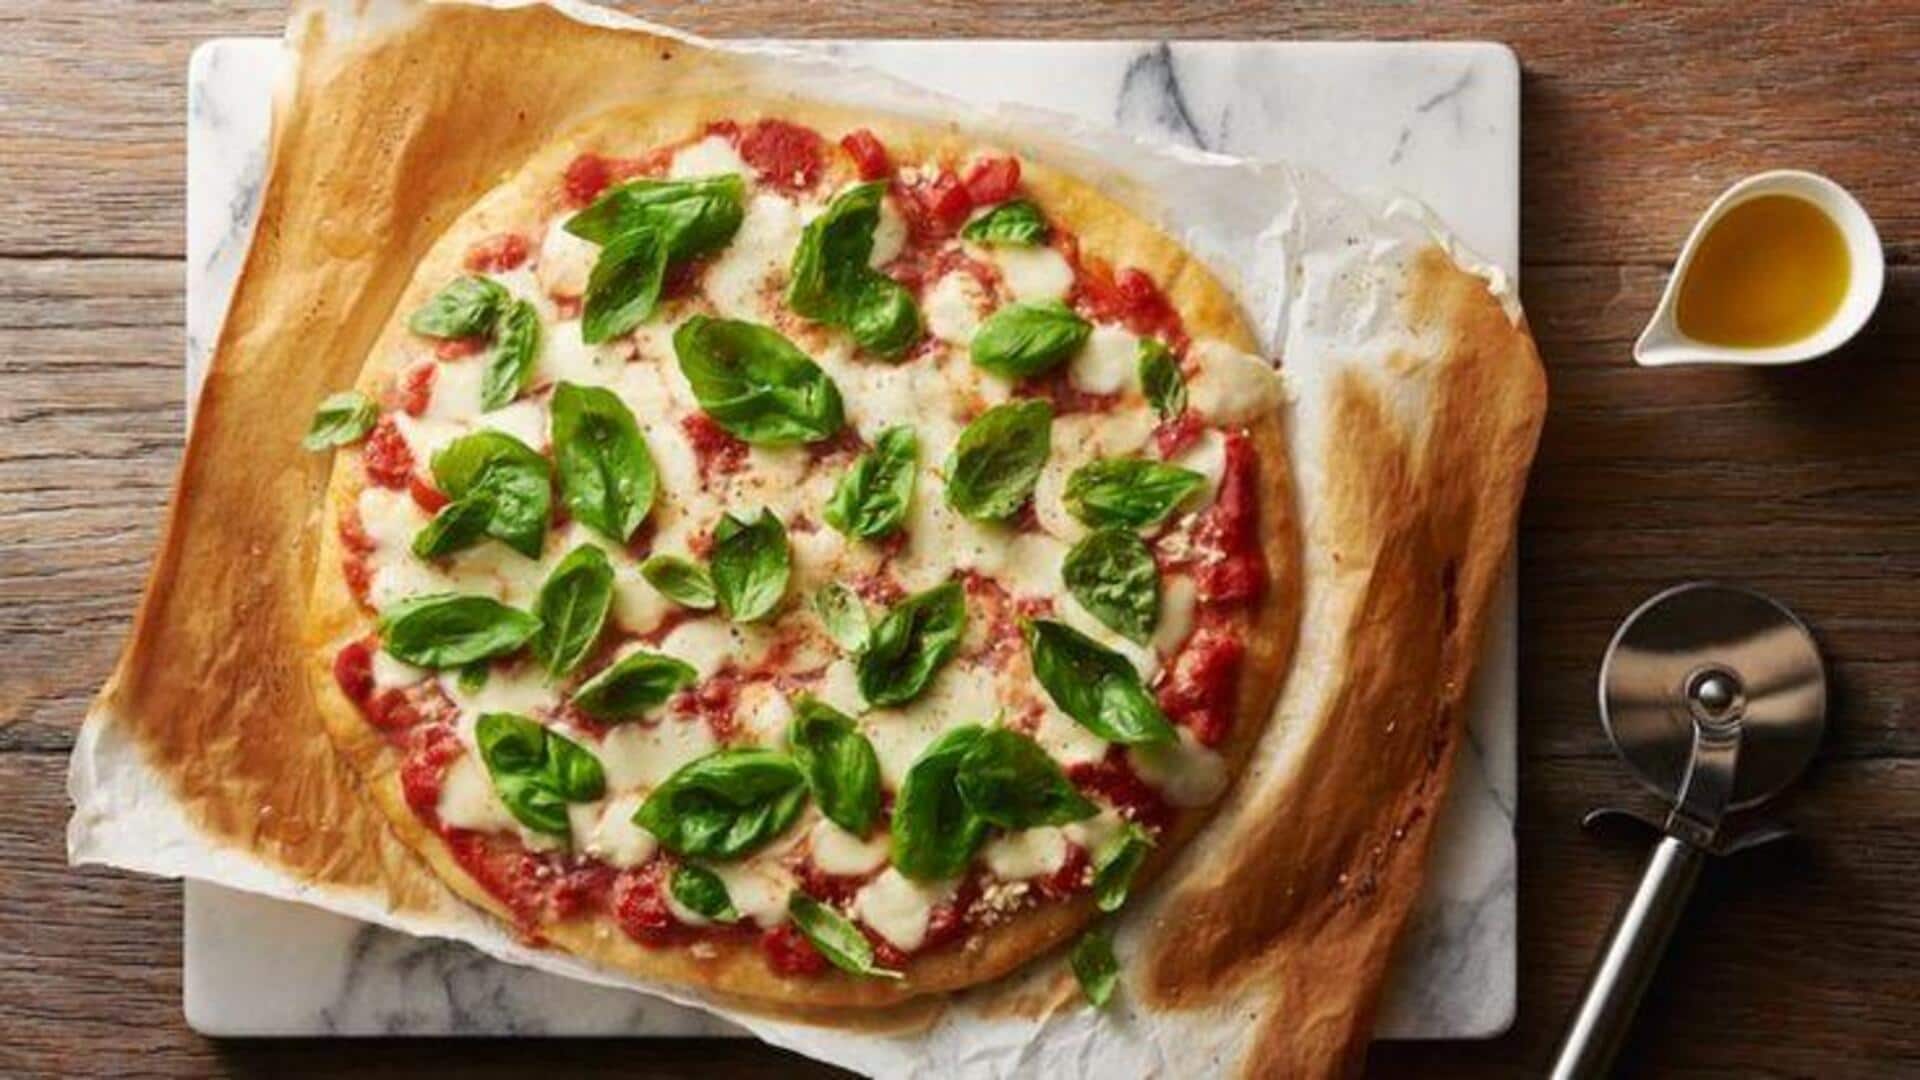 Recipe: Make this delicious Margherita pizza at home